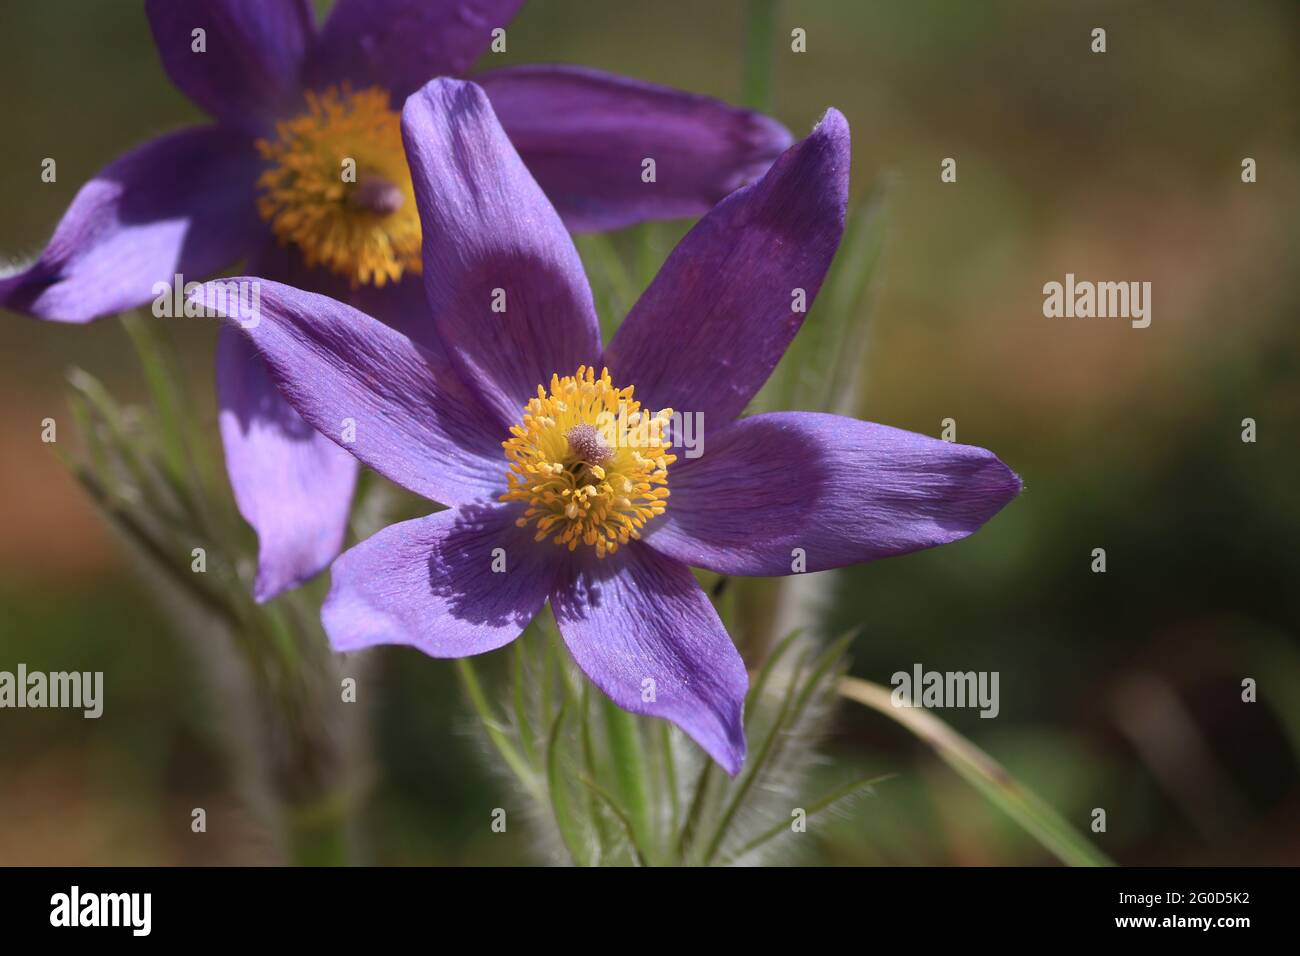 Violet-yellow spring flowers on sunny forest glade in springtime. Purple snowdrops close-up in sunlight. Pulsatilla patens, eastern pasqueflower. Stock Photo